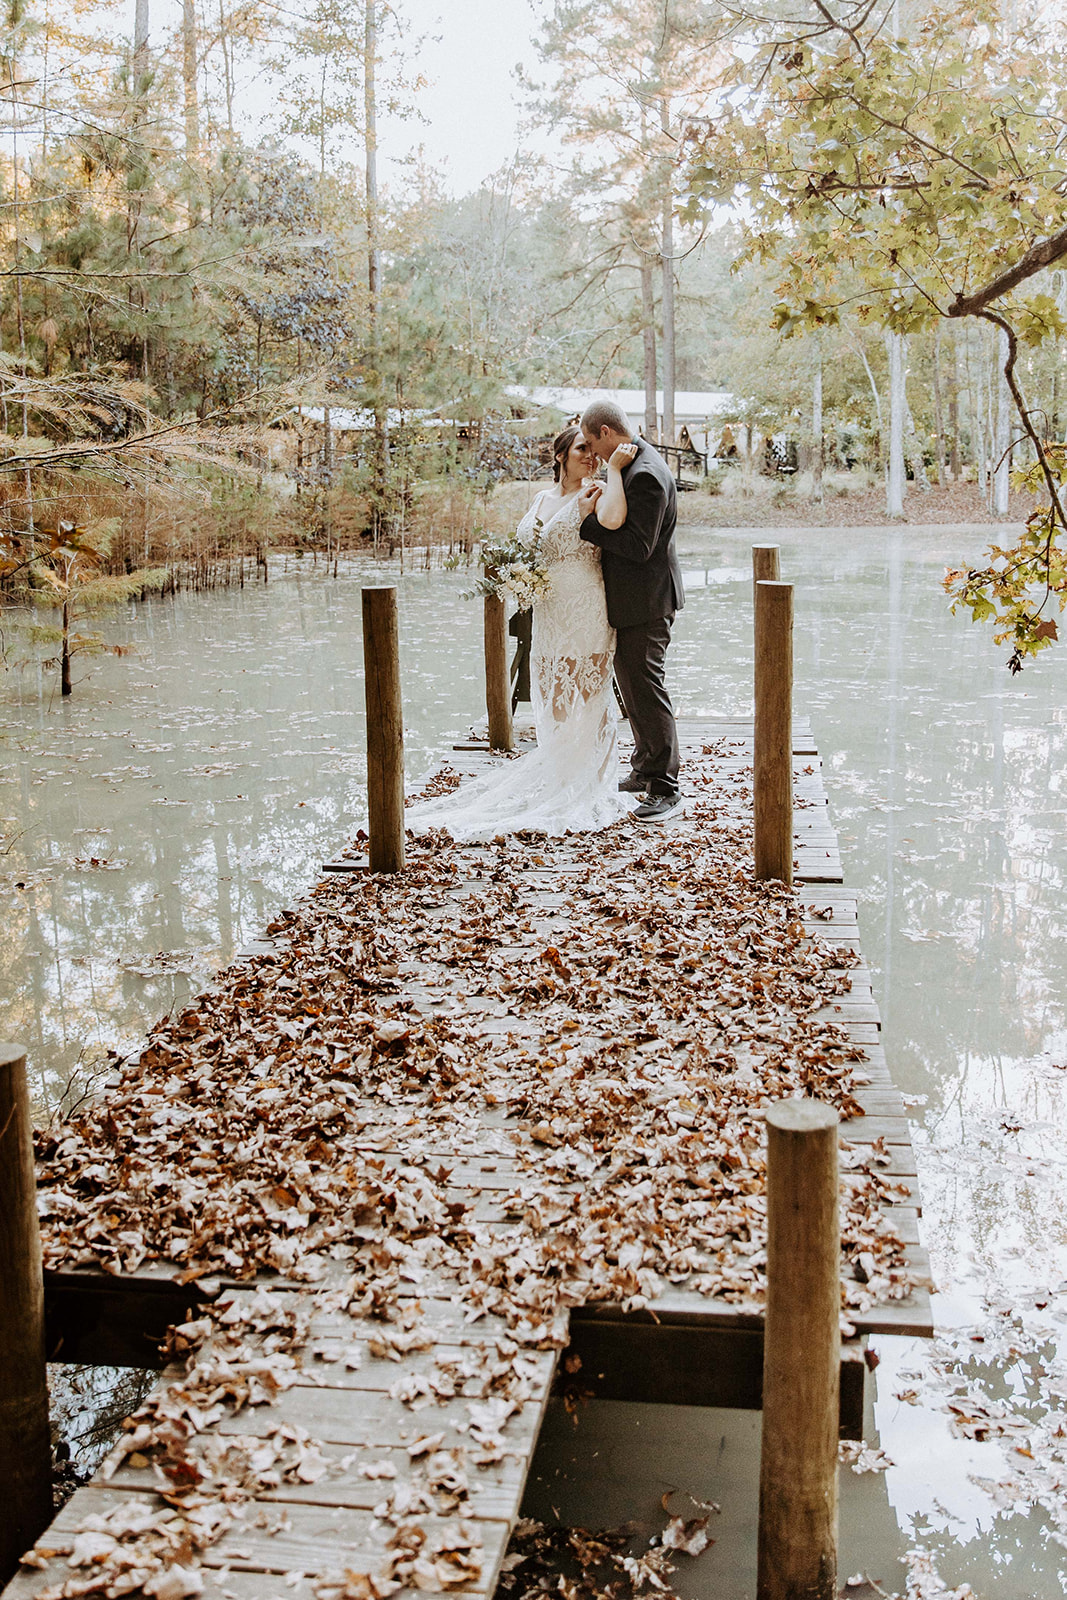 A newlywed couple stands outdoors, the groom in a black suit holding the bride in a white dress who is holding a bouquet. The setting is grassy with trees in the background at their fall elopement